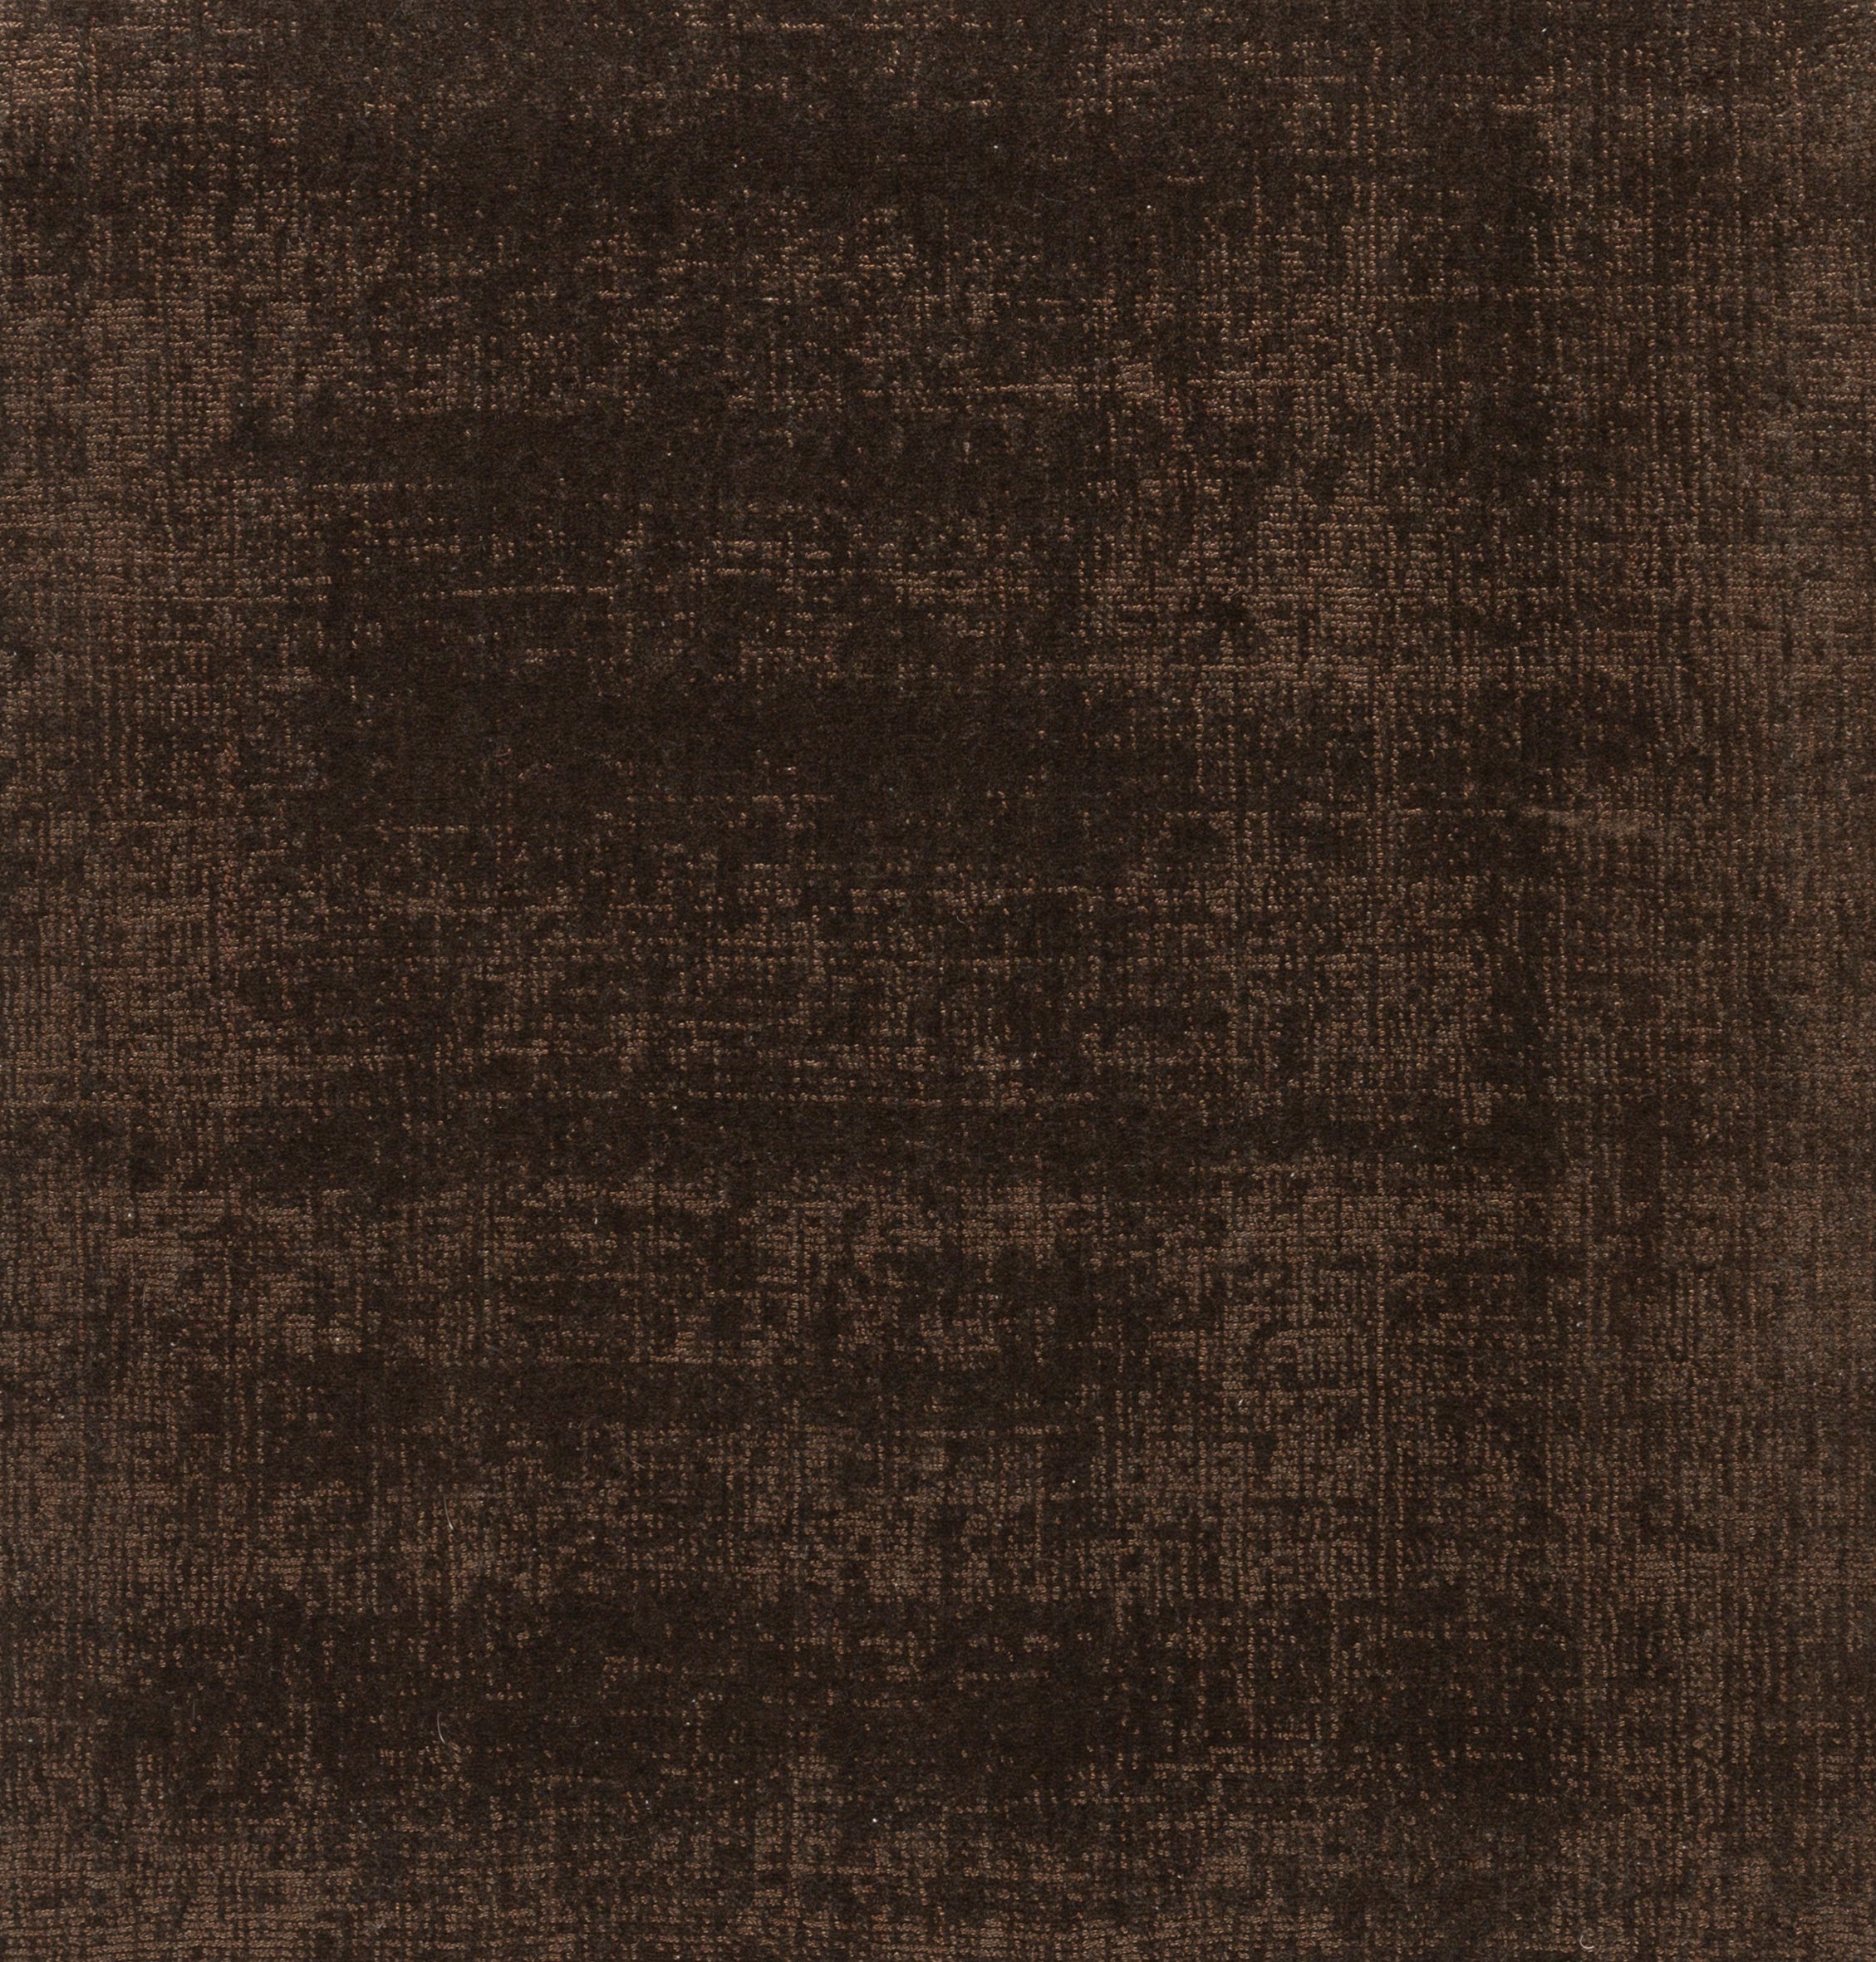 Surya Klein Solids and Tonals Black KLE-1003 Area Rug